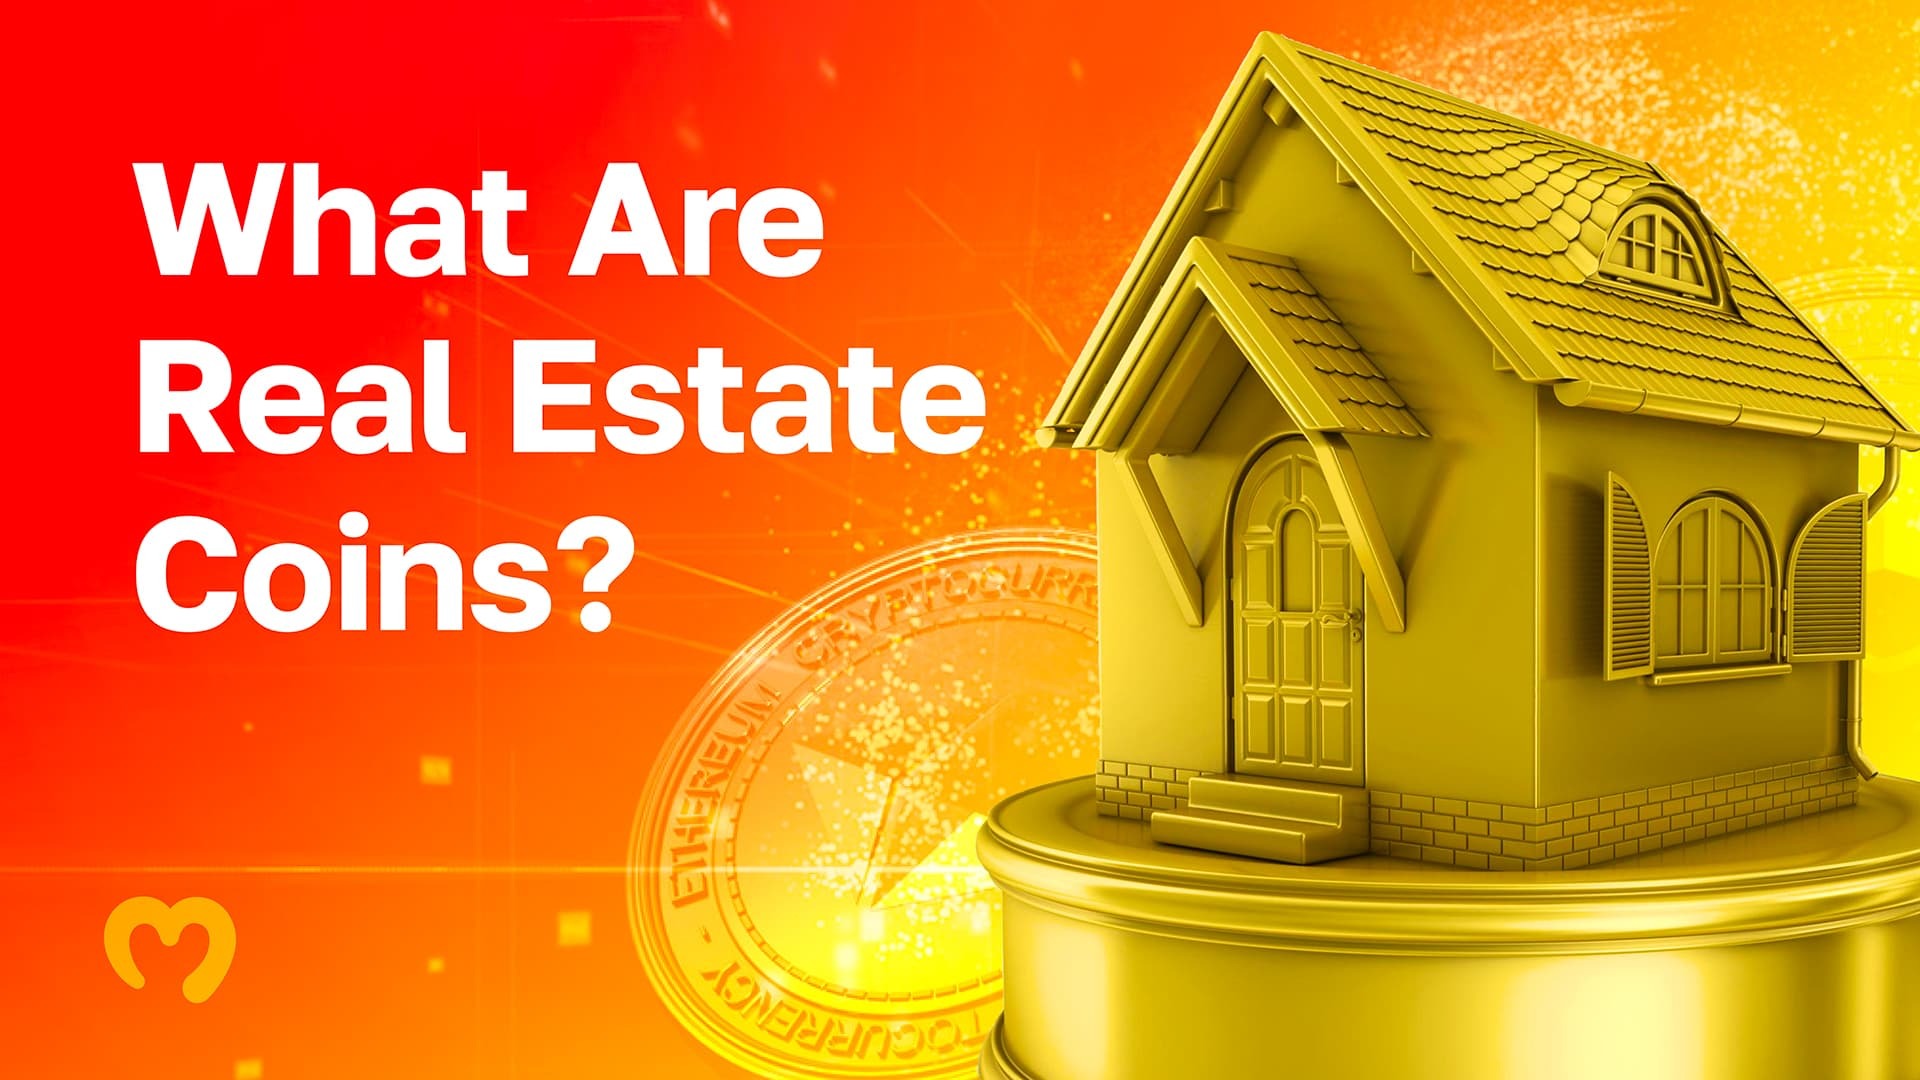 22_08_What-Are-Real-Estate-Coins-